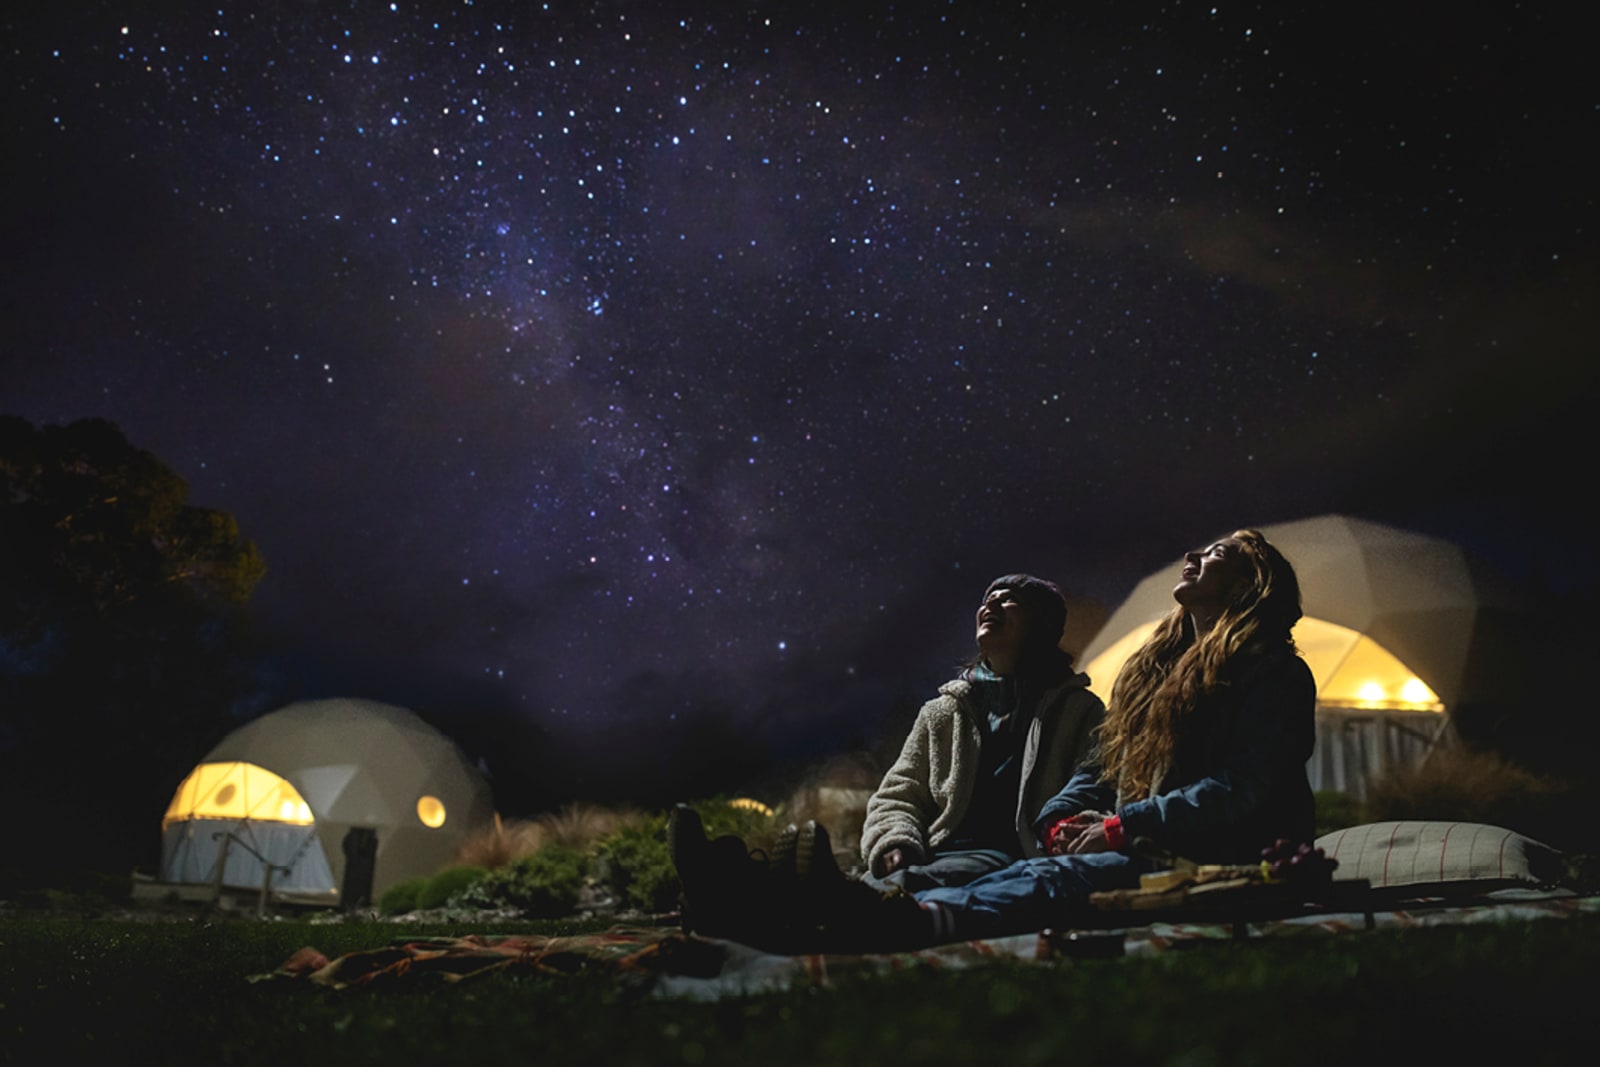 Two people stargazing at the world's largest dark sky reserve in Aoraki